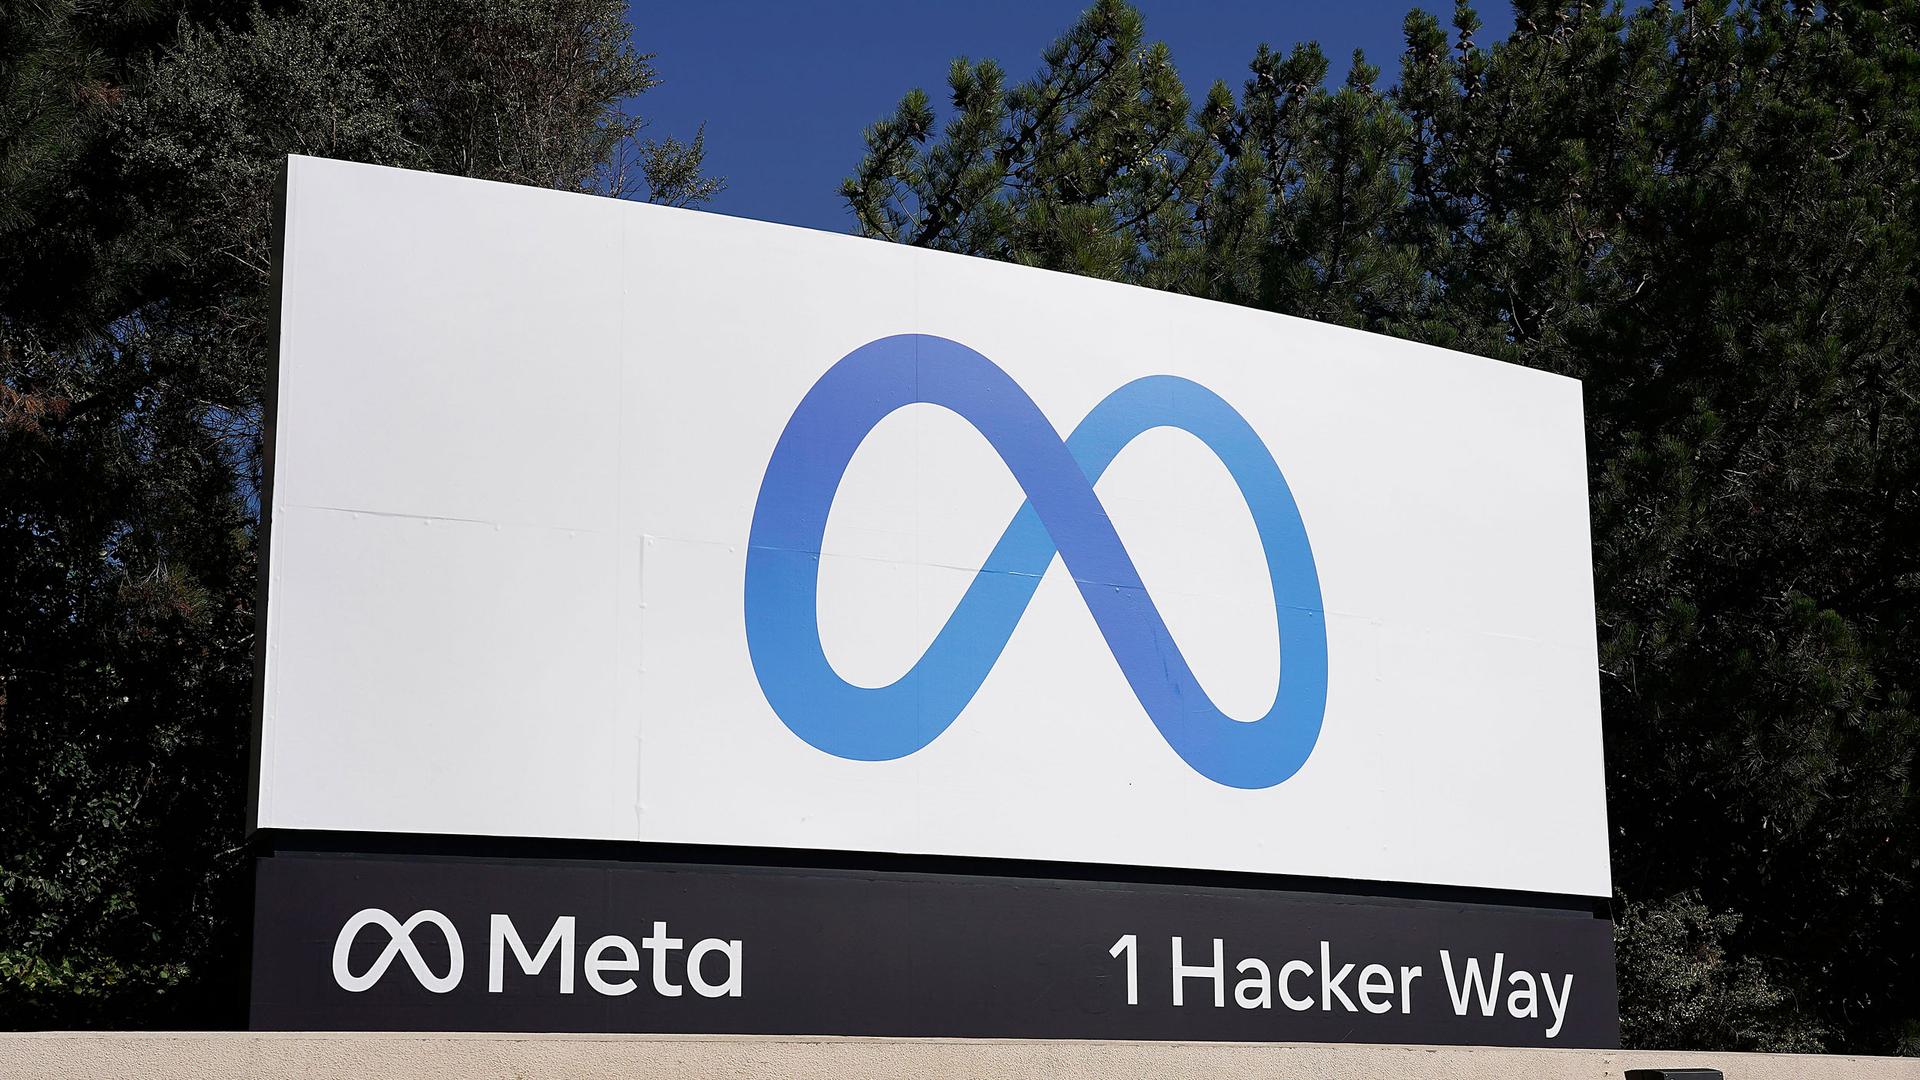 Facebook's Meta logo sign is seen at the company headquarters in Menlo Park, California, on Oct. 28, 2021